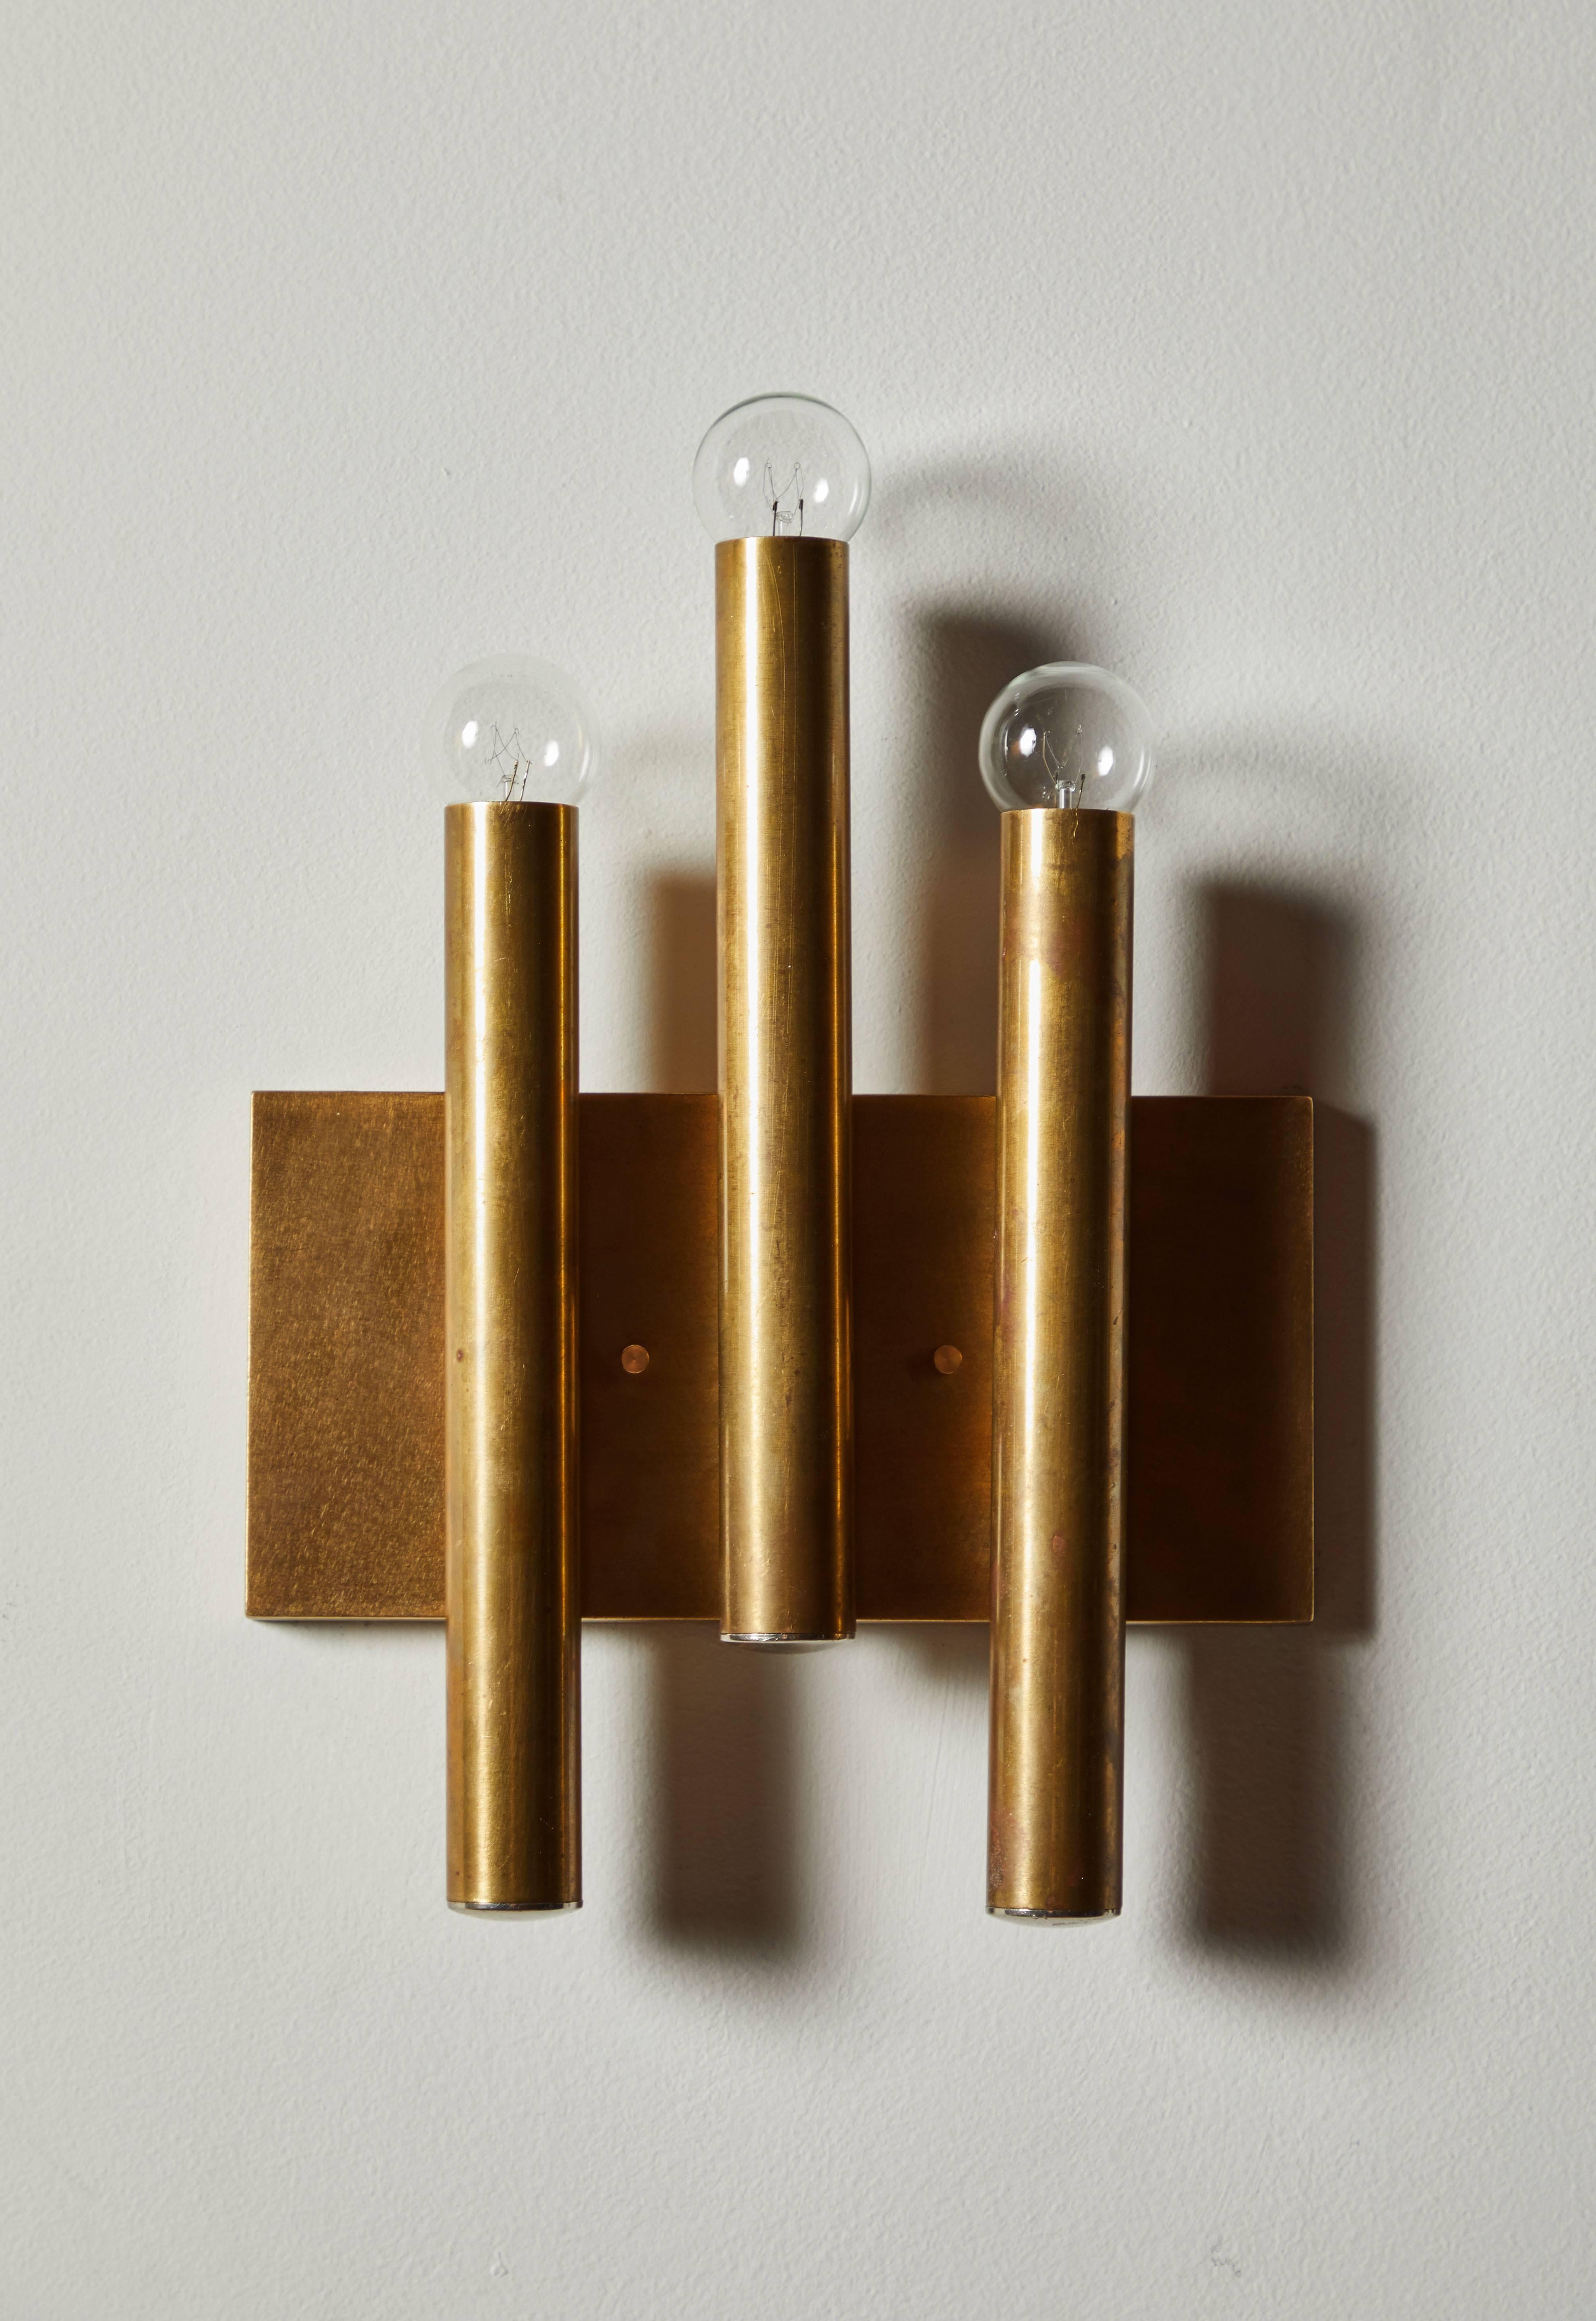 Single Italian Sconce in the Style of Gio Ponti for Candle 1